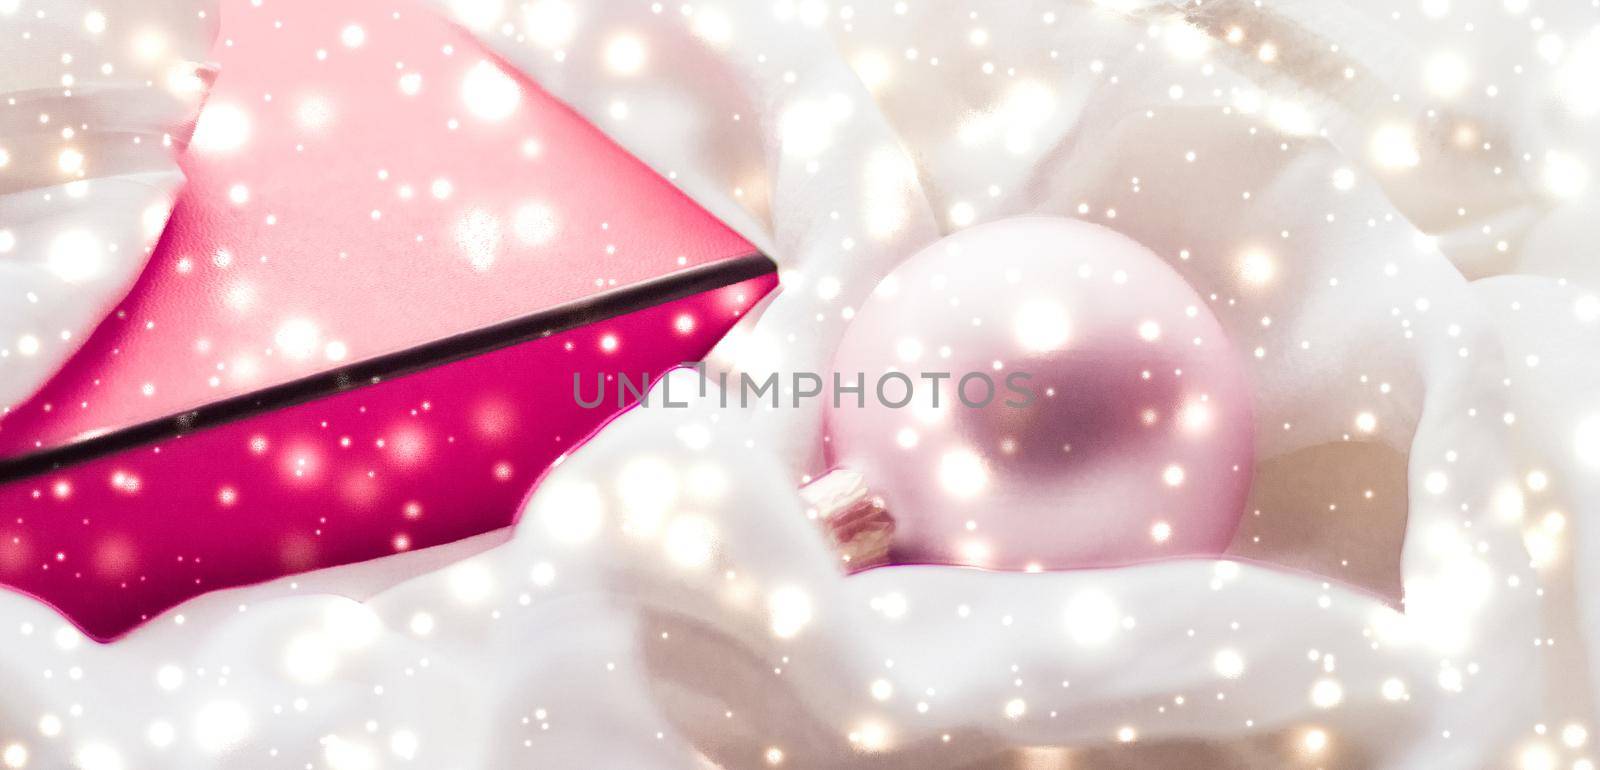 Holidays branding, glamour and decoration concept - Christmas magic holiday background, festive baubles, pink vintage gift box and golden glitter as winter season present for luxury brand design